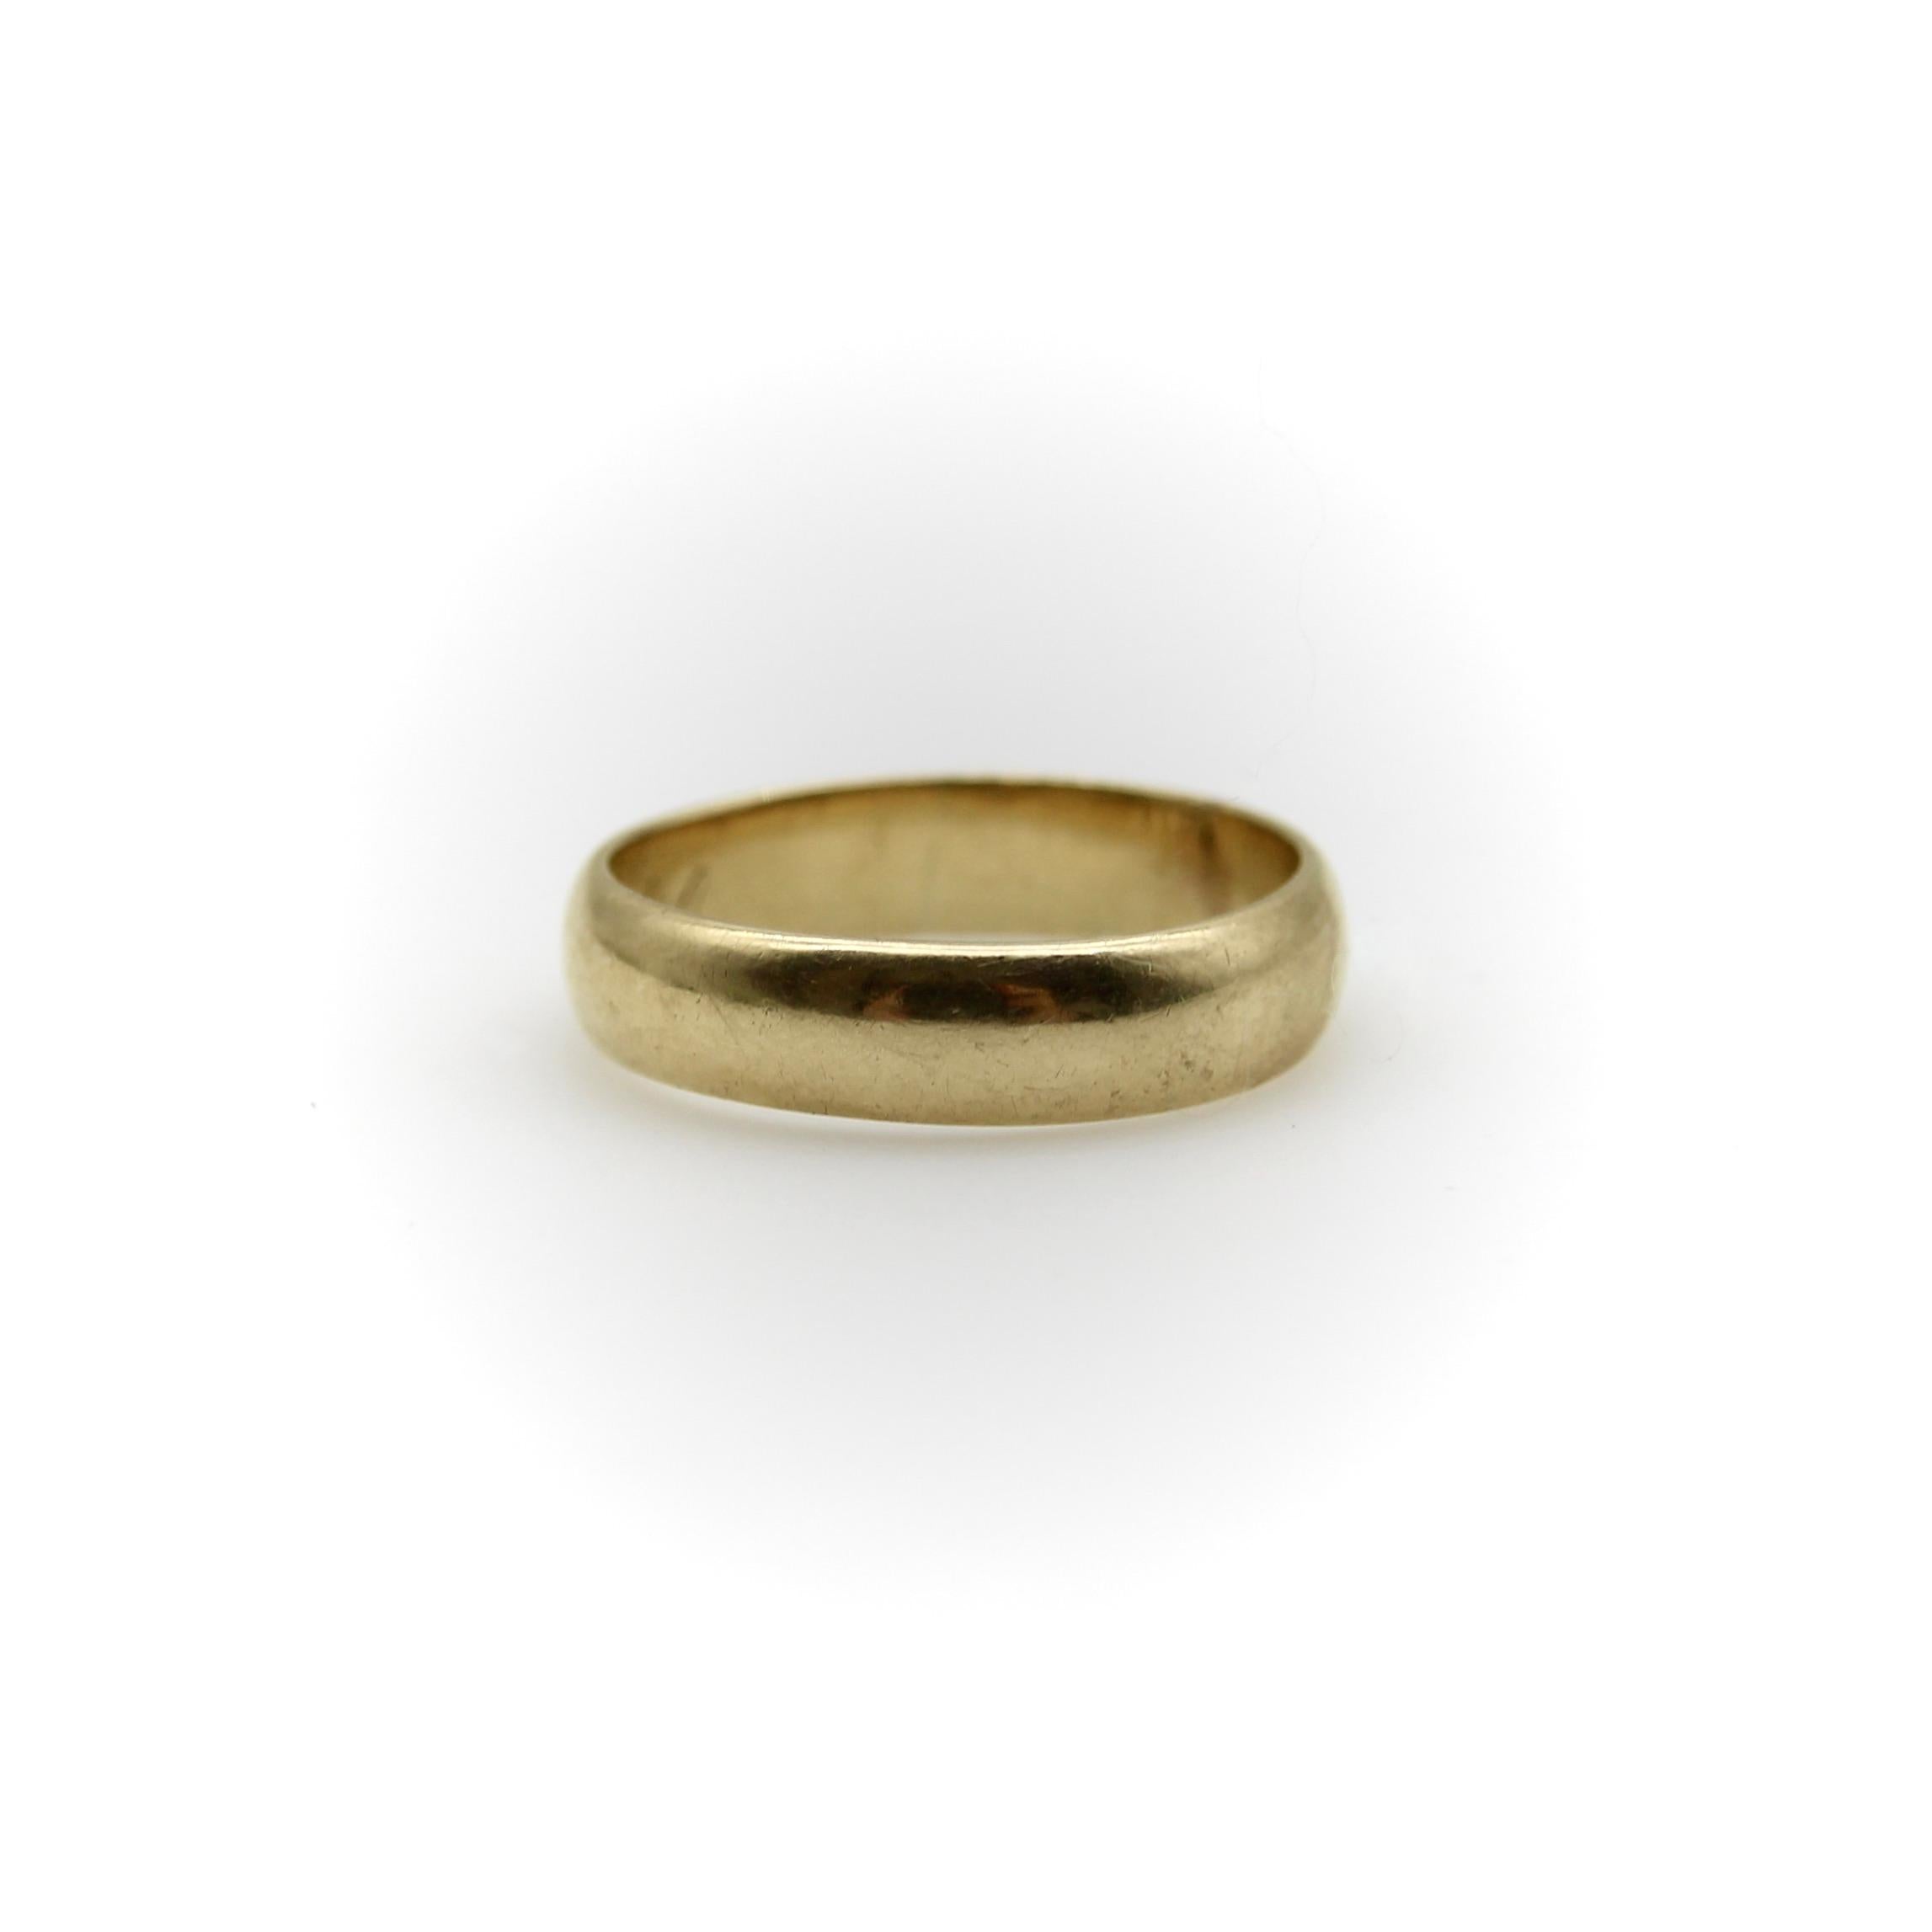 Victorian 14K Gold Wedding Band with Feb. 16 1889 Inscription  In Good Condition For Sale In Venice, CA